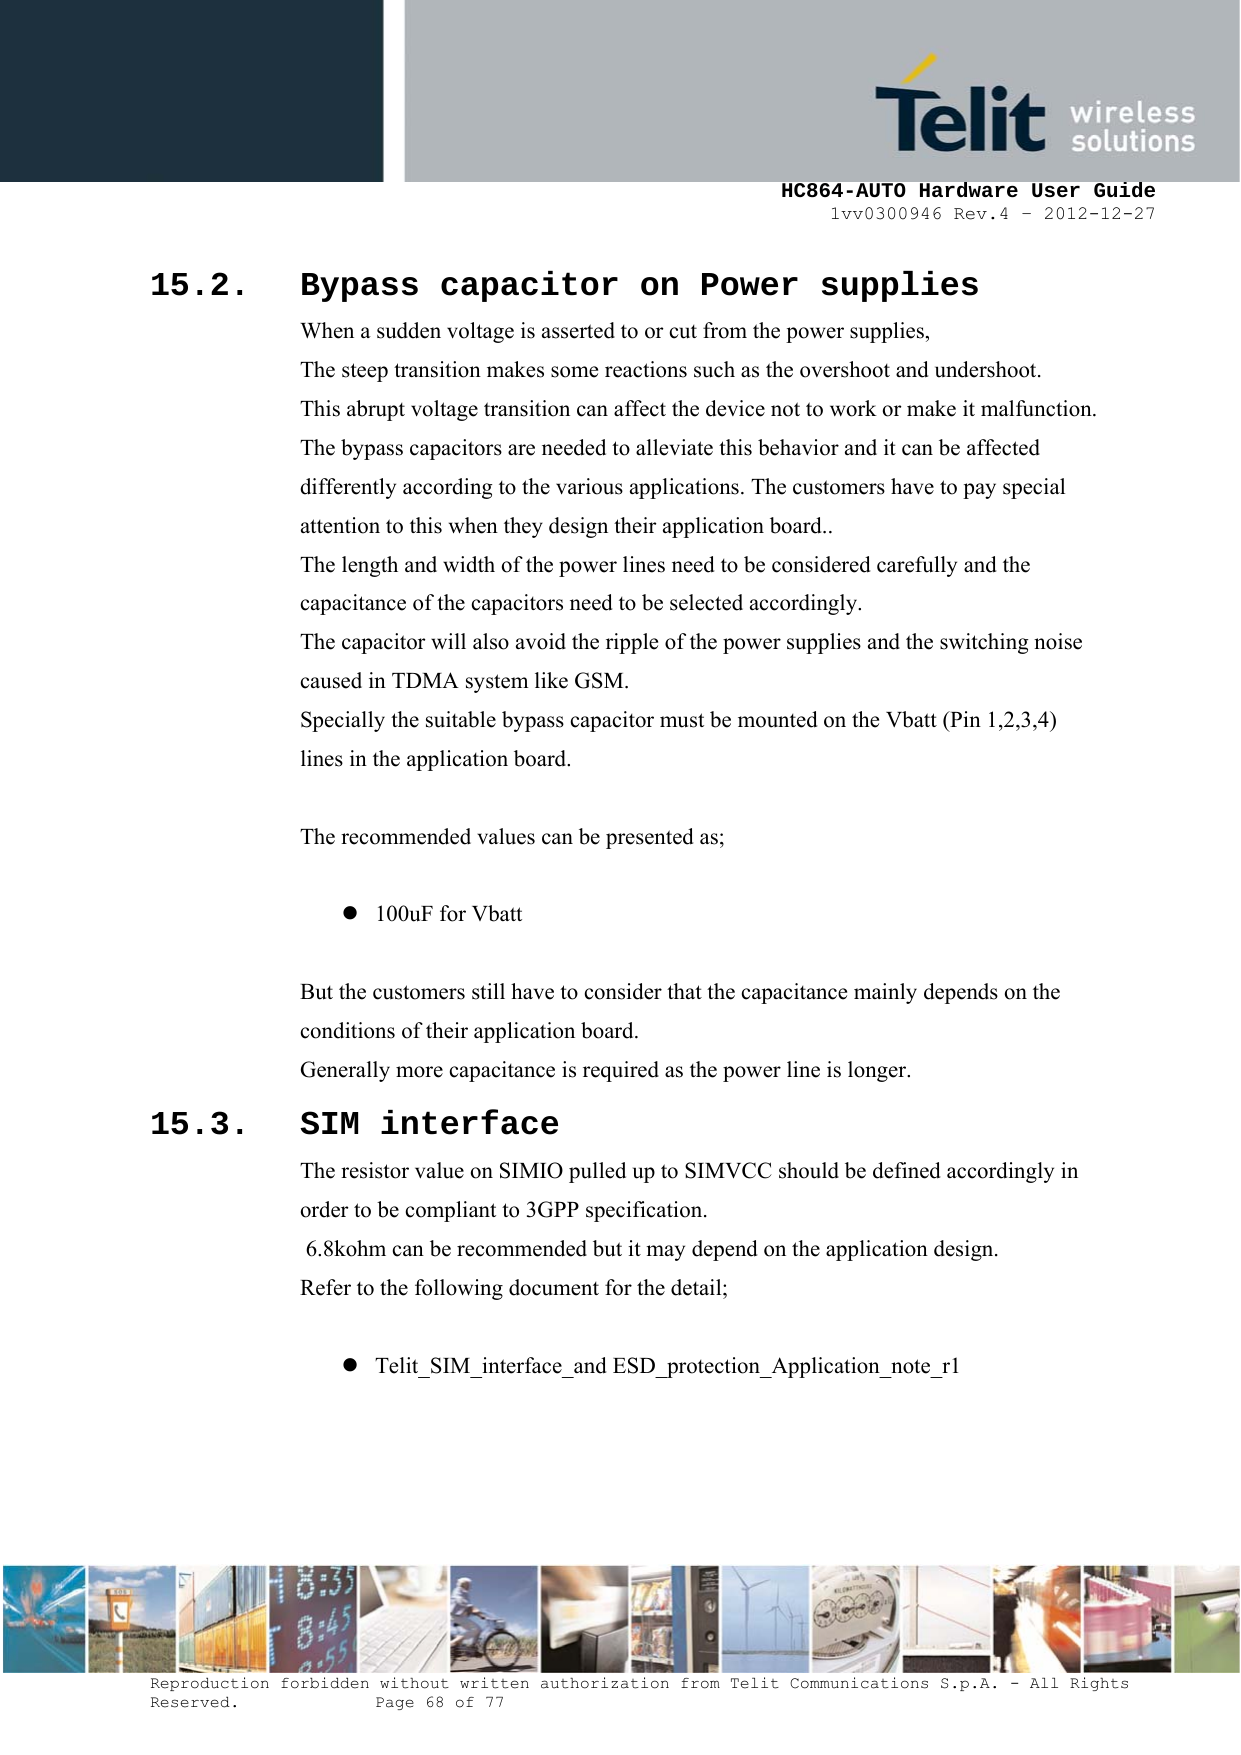     HC864-AUTO Hardware User Guide 1vv0300946 Rev.4 – 2012-12-27 Reproduction forbidden without written authorization from Telit Communications S.p.A. - All Rights Reserved.    Page 68 of 77  15.2. Bypass capacitor on Power supplies When a sudden voltage is asserted to or cut from the power supplies, The steep transition makes some reactions such as the overshoot and undershoot. This abrupt voltage transition can affect the device not to work or make it malfunction. The bypass capacitors are needed to alleviate this behavior and it can be affected differently according to the various applications. The customers have to pay special attention to this when they design their application board.. The length and width of the power lines need to be considered carefully and the capacitance of the capacitors need to be selected accordingly. The capacitor will also avoid the ripple of the power supplies and the switching noise caused in TDMA system like GSM.  Specially the suitable bypass capacitor must be mounted on the Vbatt (Pin 1,2,3,4)  lines in the application board.  The recommended values can be presented as;  z 100uF for Vbatt  But the customers still have to consider that the capacitance mainly depends on the  conditions of their application board. Generally more capacitance is required as the power line is longer. 15.3. SIM interface The resistor value on SIMIO pulled up to SIMVCC should be defined accordingly in  order to be compliant to 3GPP specification.  6.8kohm can be recommended but it may depend on the application design. Refer to the following document for the detail;  z Telit_SIM_interface_and ESD_protection_Application_note_r1   